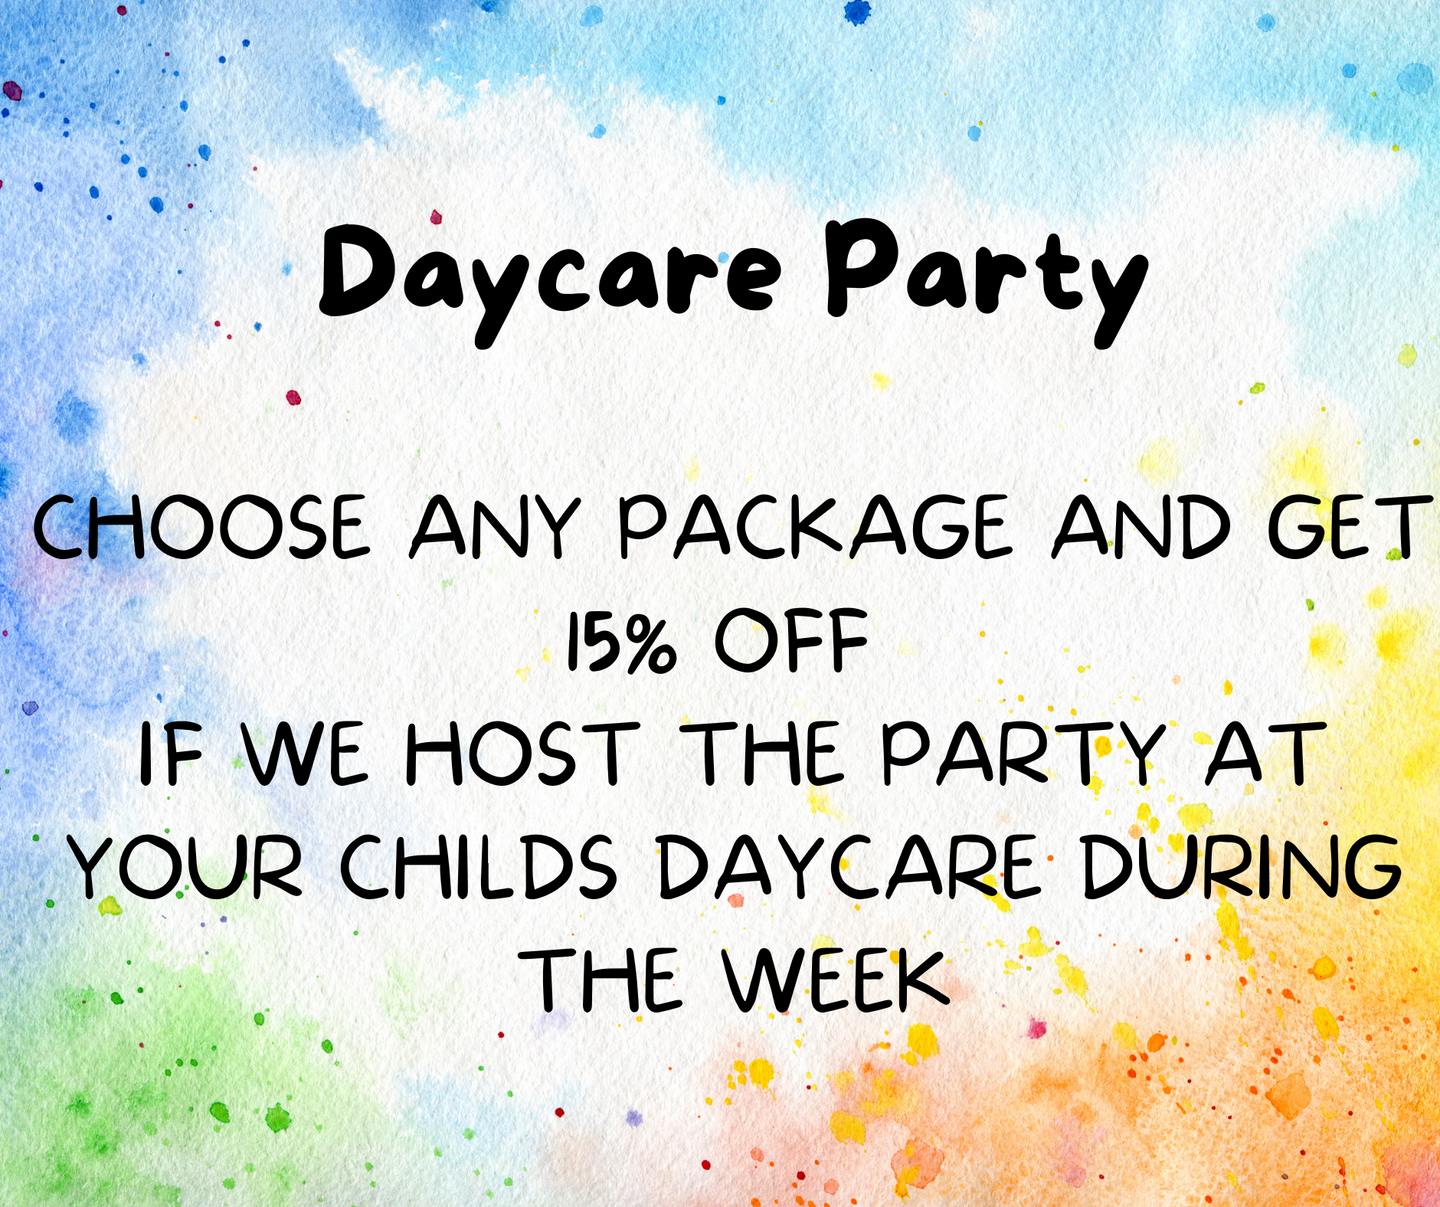 Party for Day Cares
